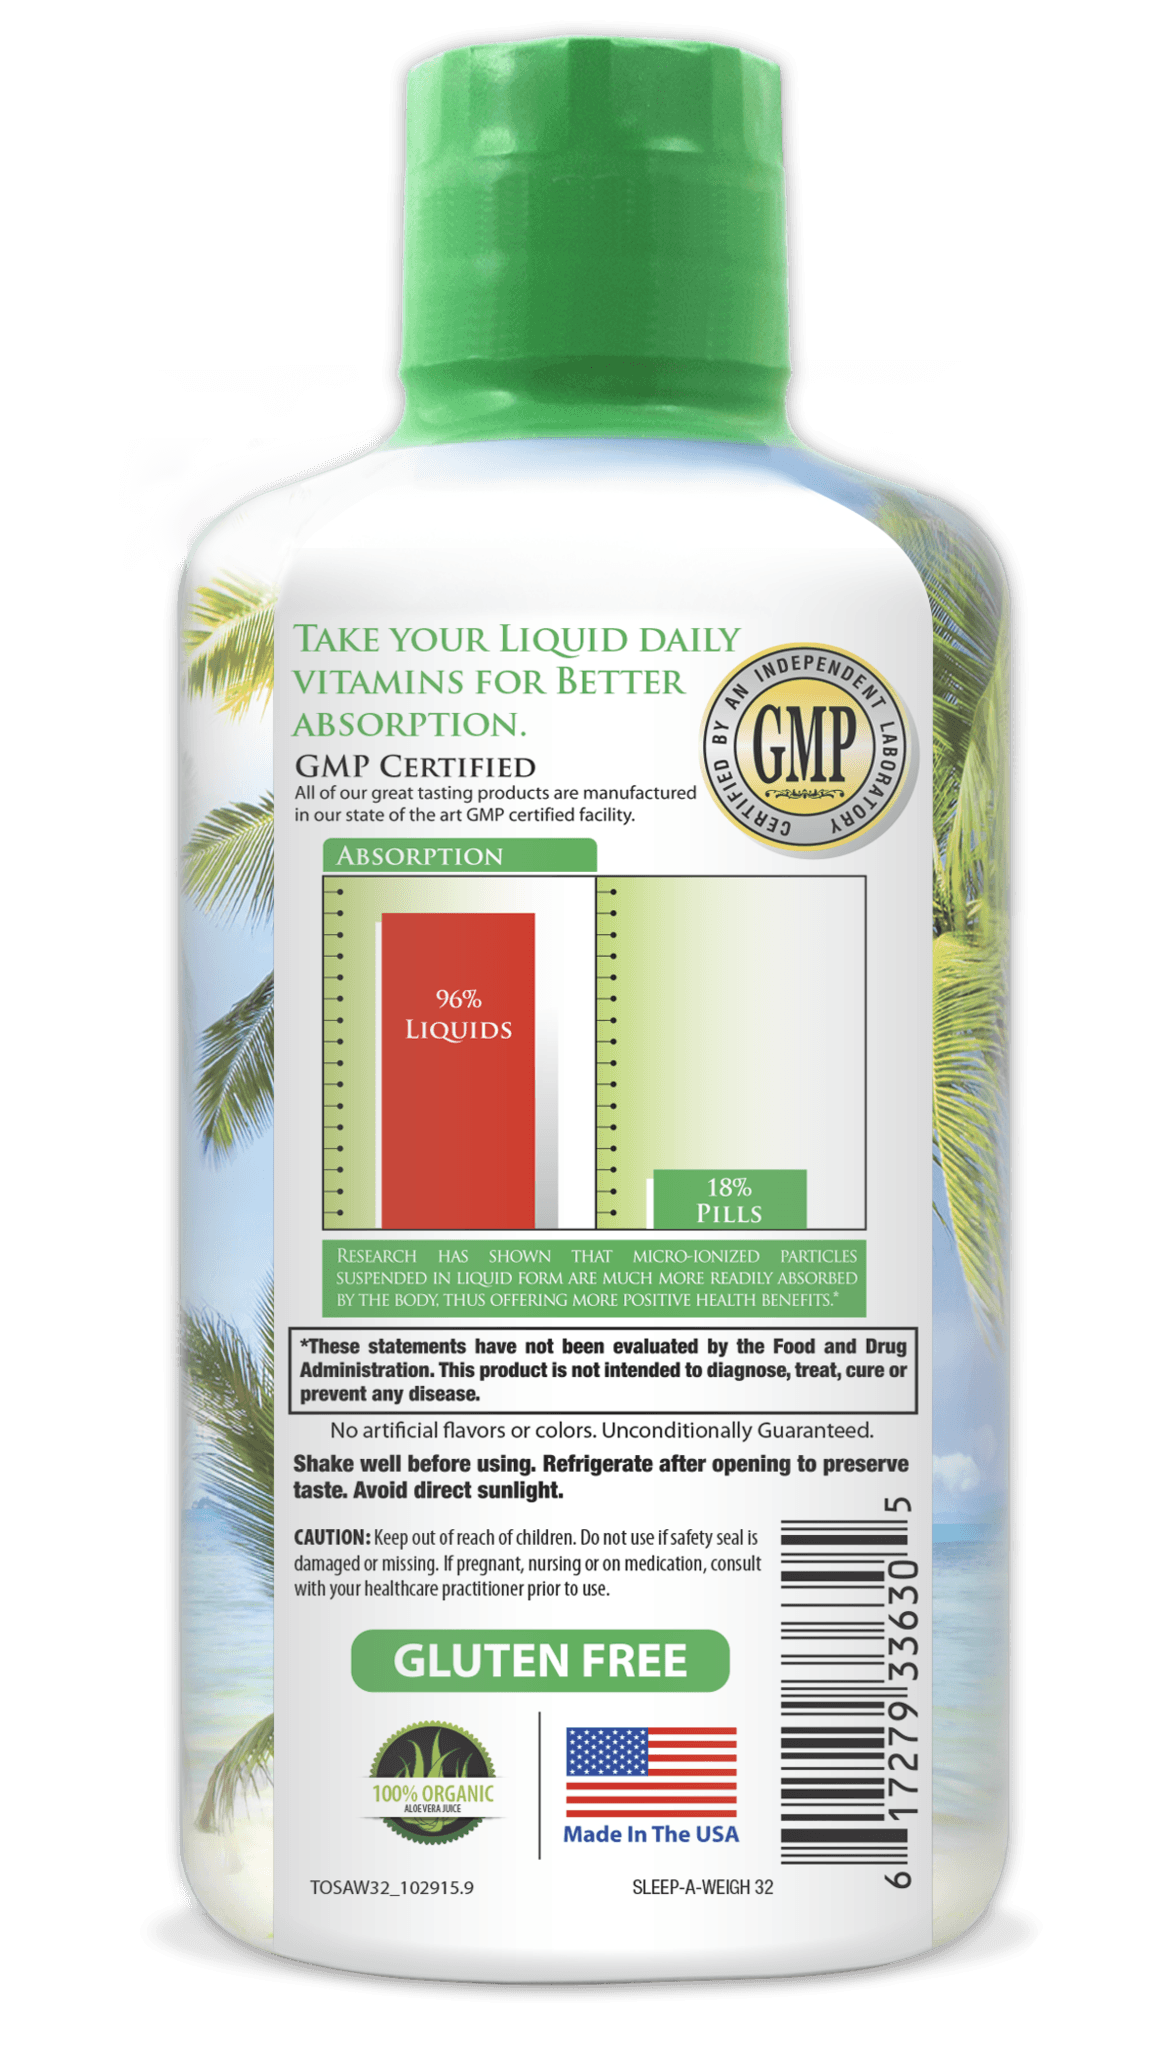 Tropical Oasis Sleep-A-Weigh Plus Liquid - Naturally Promotes Restfulness, Appetite Suppression & Fat Burning -32oz, 32serv - tropical-oasis-store